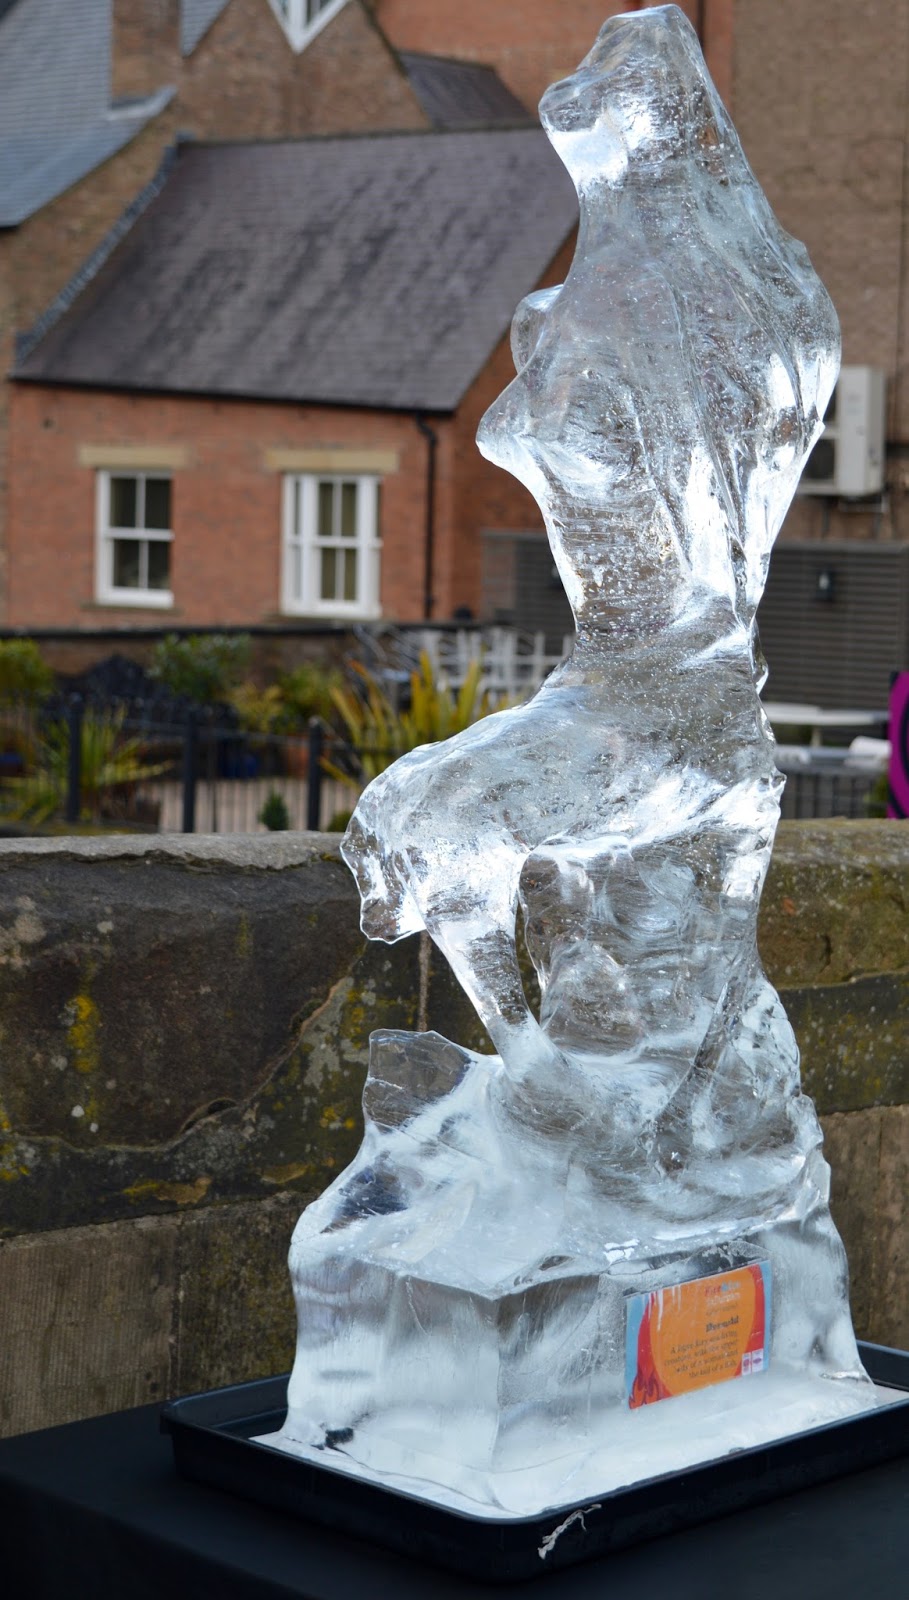 Fire and Ice Durham 2017 | Photographs & Top Tips for 2018 - melted ice mermaid